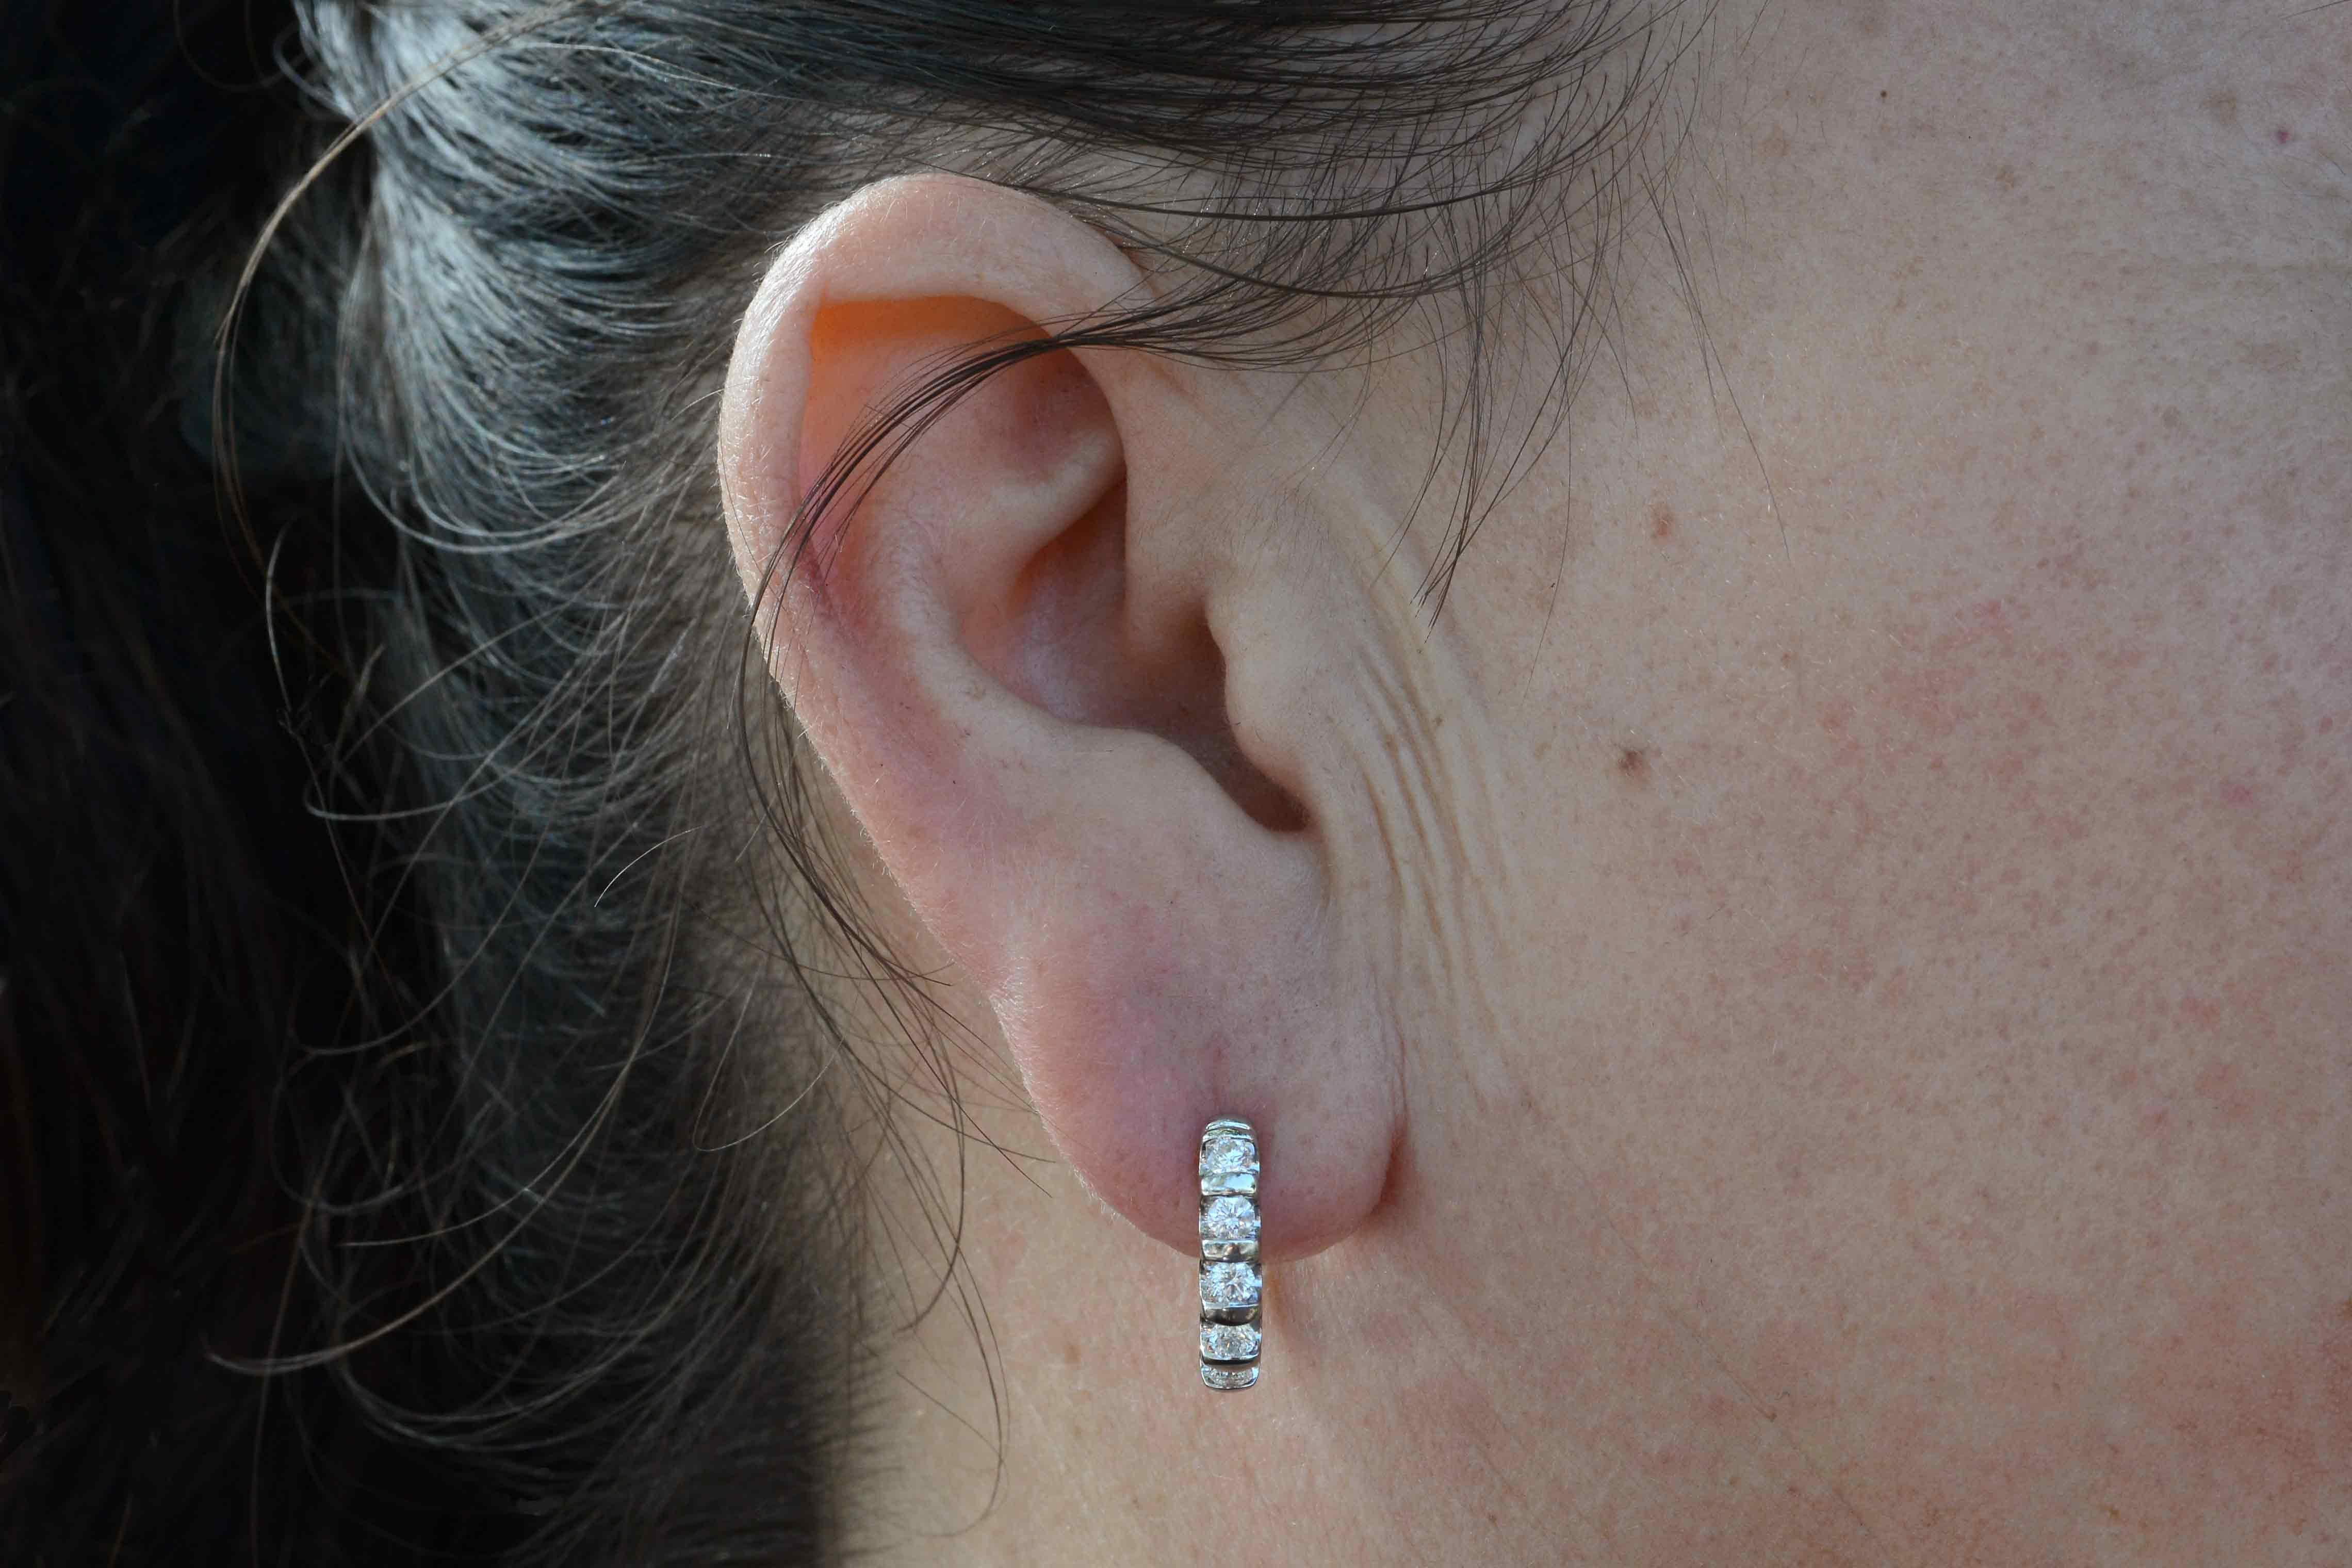 We are excited over these newly-acquired diamond hoop earrings in the popular huggie style. The white, sparkling brilliance of 0.75 carats is near blinding. Set artfully in a semi-channel setting of enduring platinum with a securely locking post